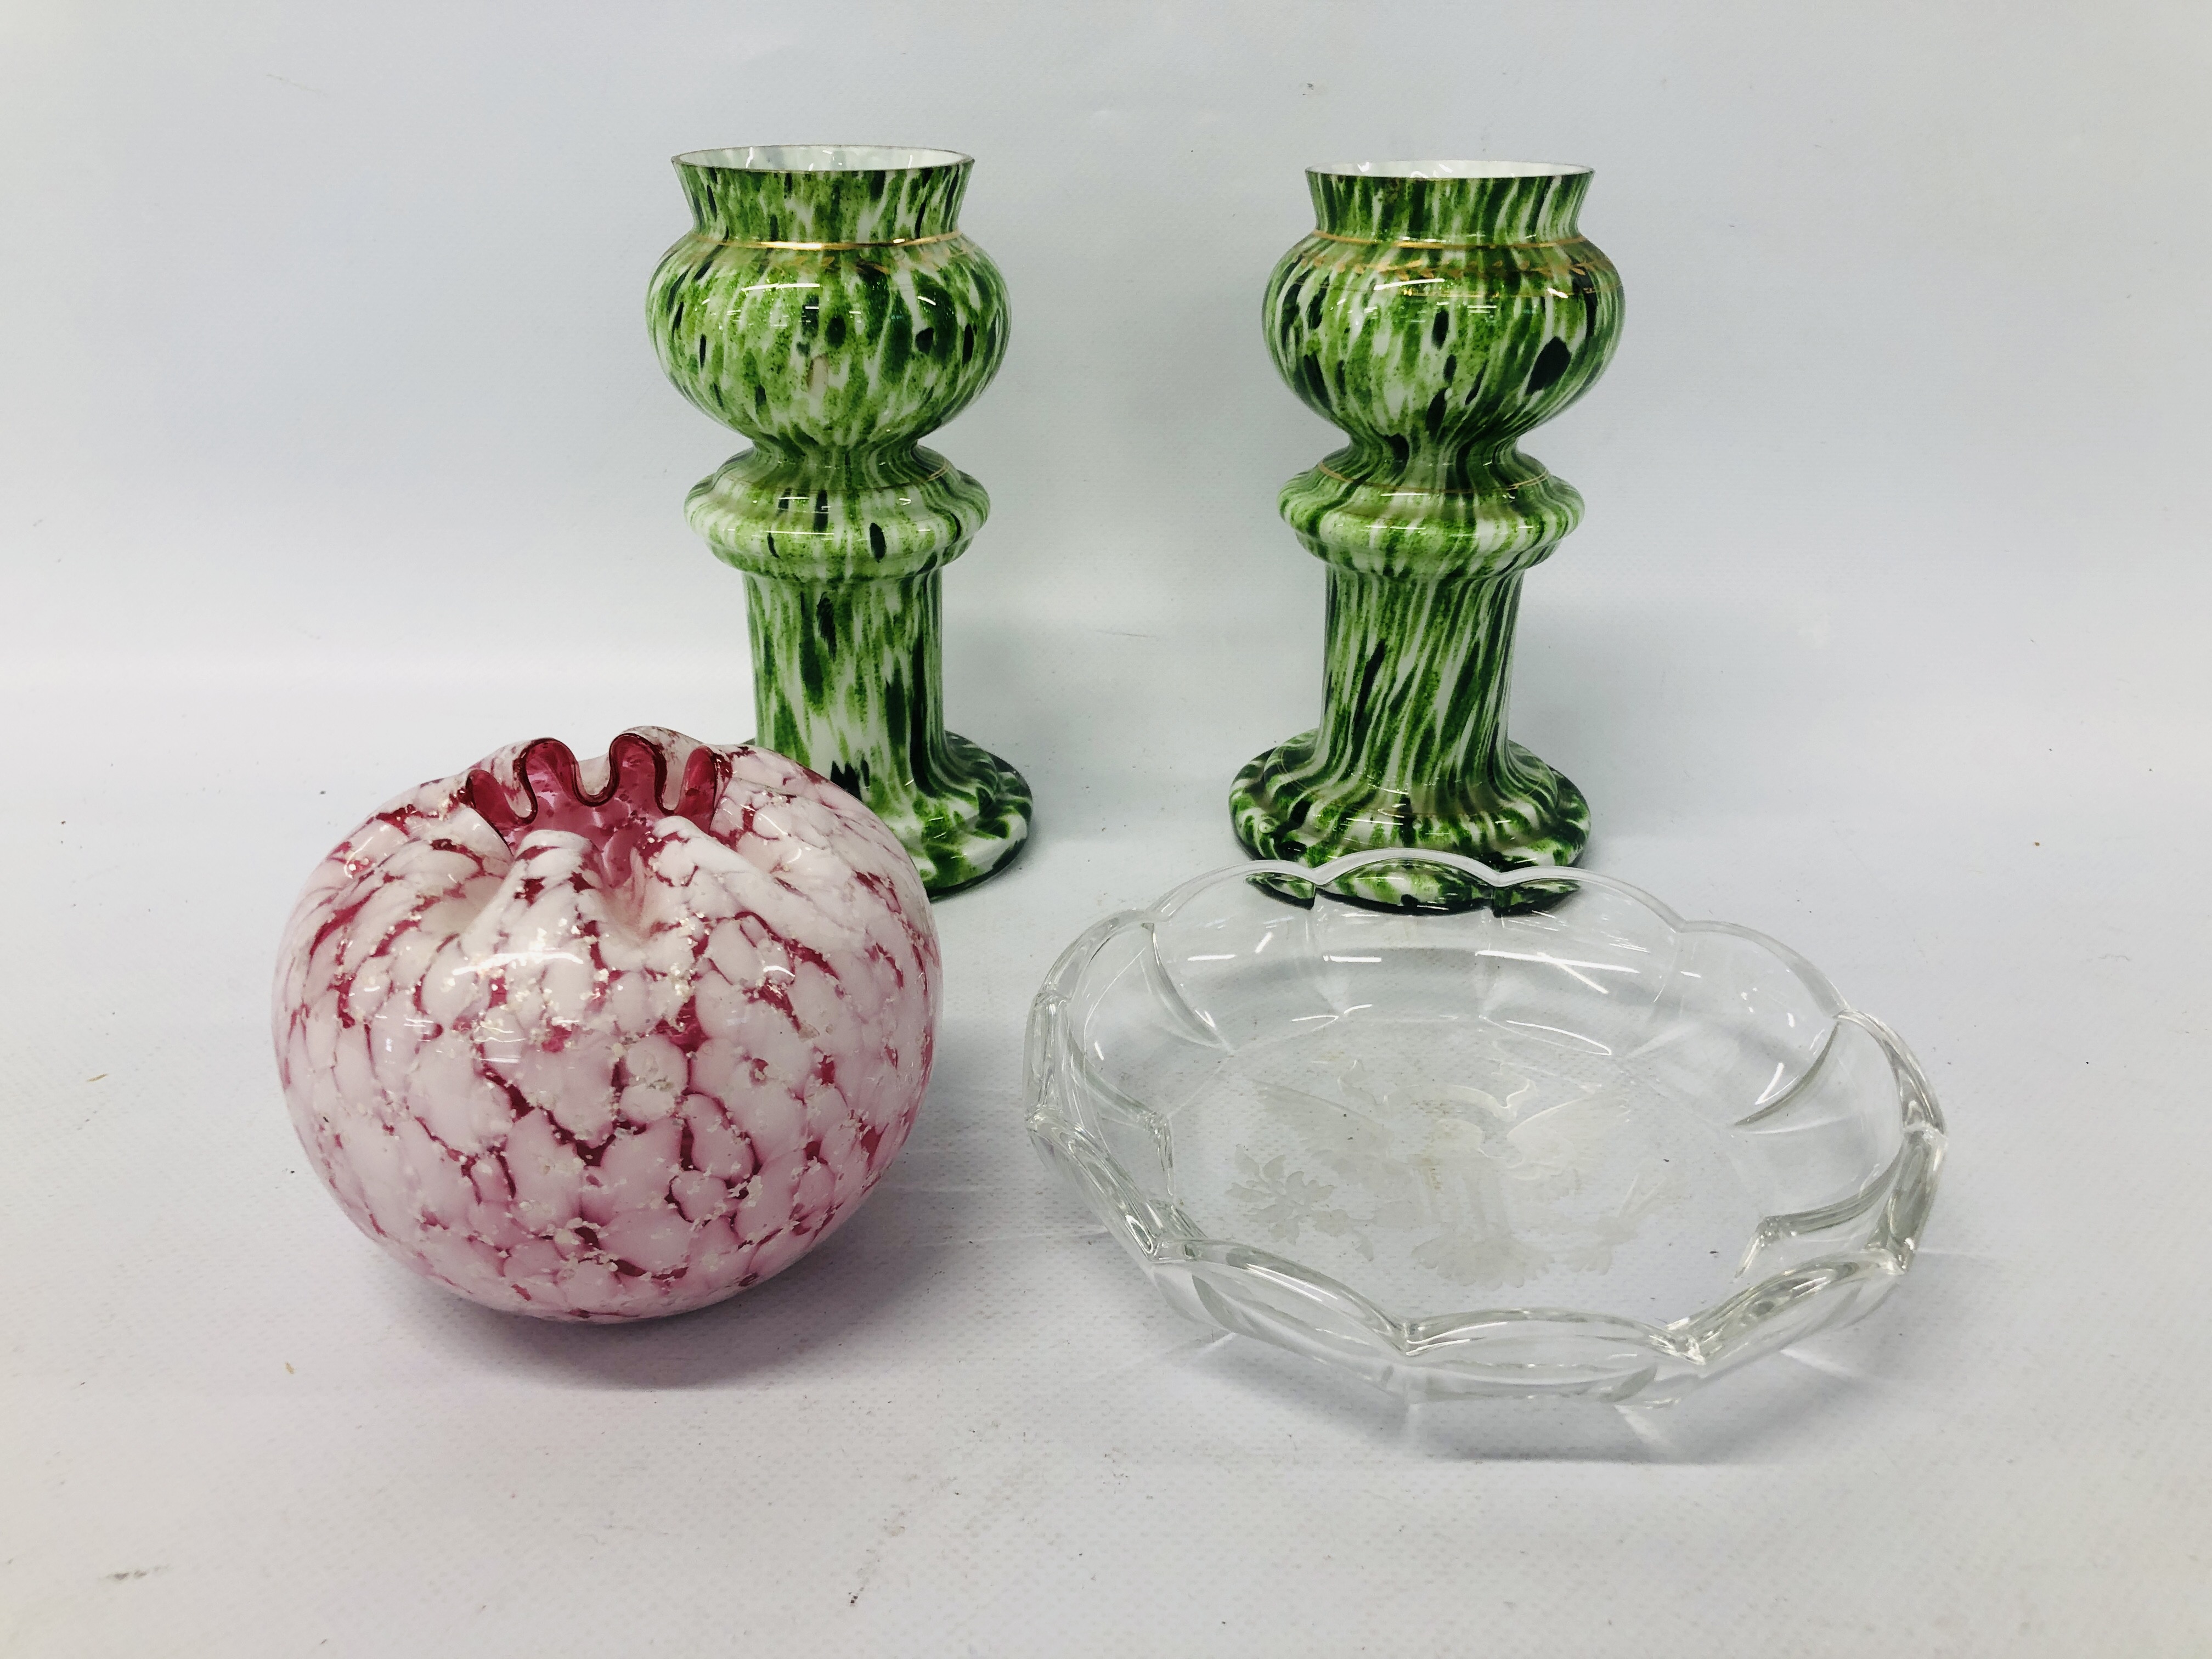 PAIR OF VINTAGE GREEN GLASS VASES, PINK & WHITE VASE ALONG WITH A CRYSTAL DISH MARKED MVSL,